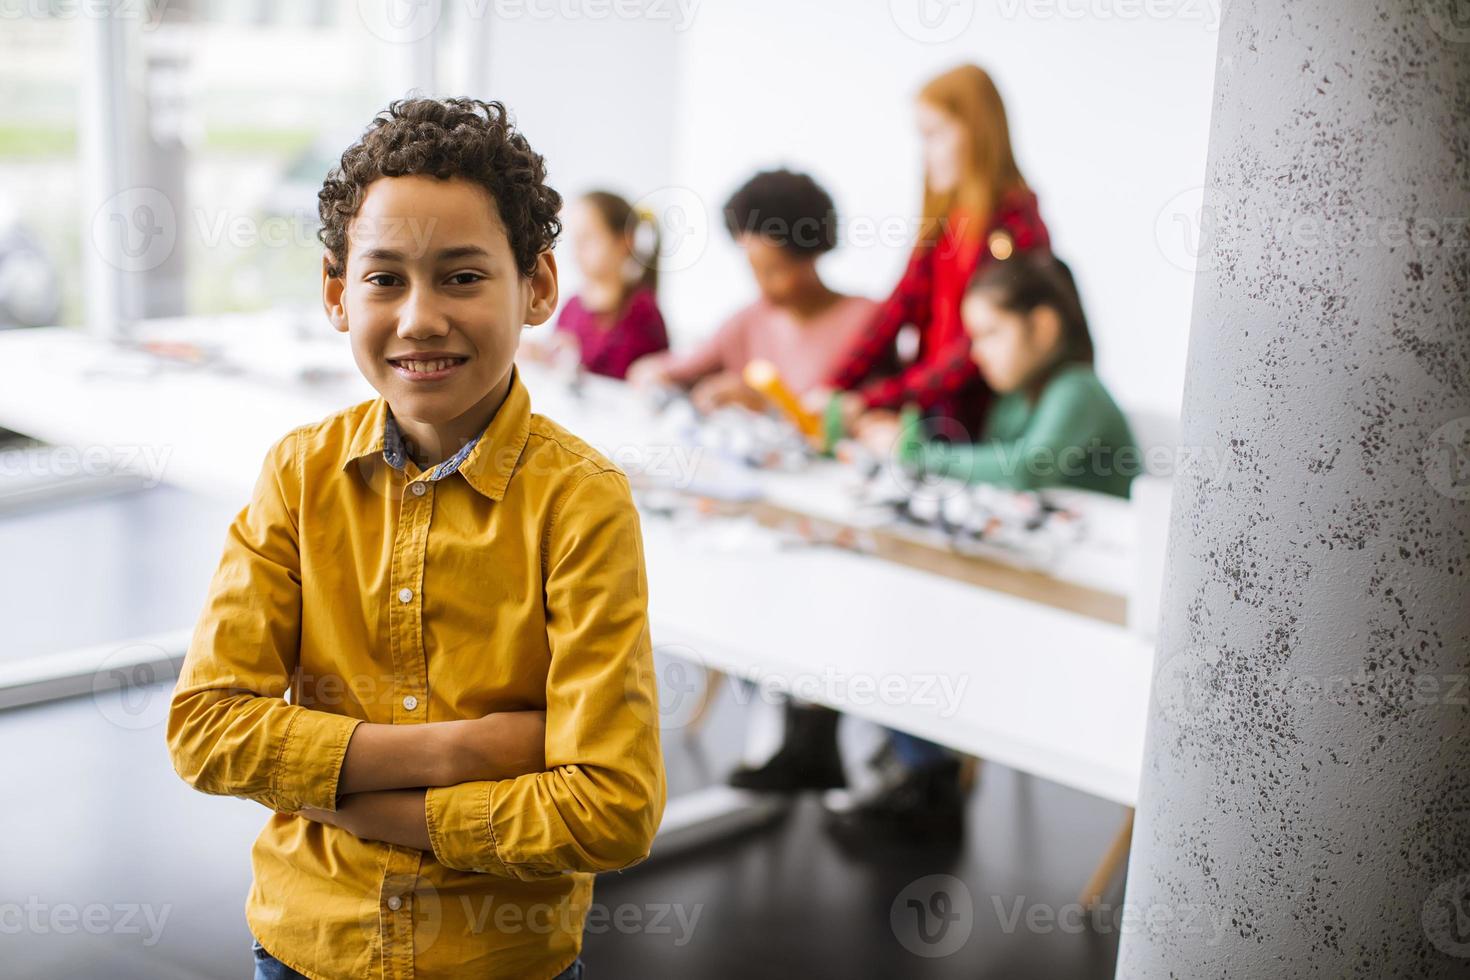 Cute little boy standing in front of kids programming electric toys and robots at robotics classroom photo